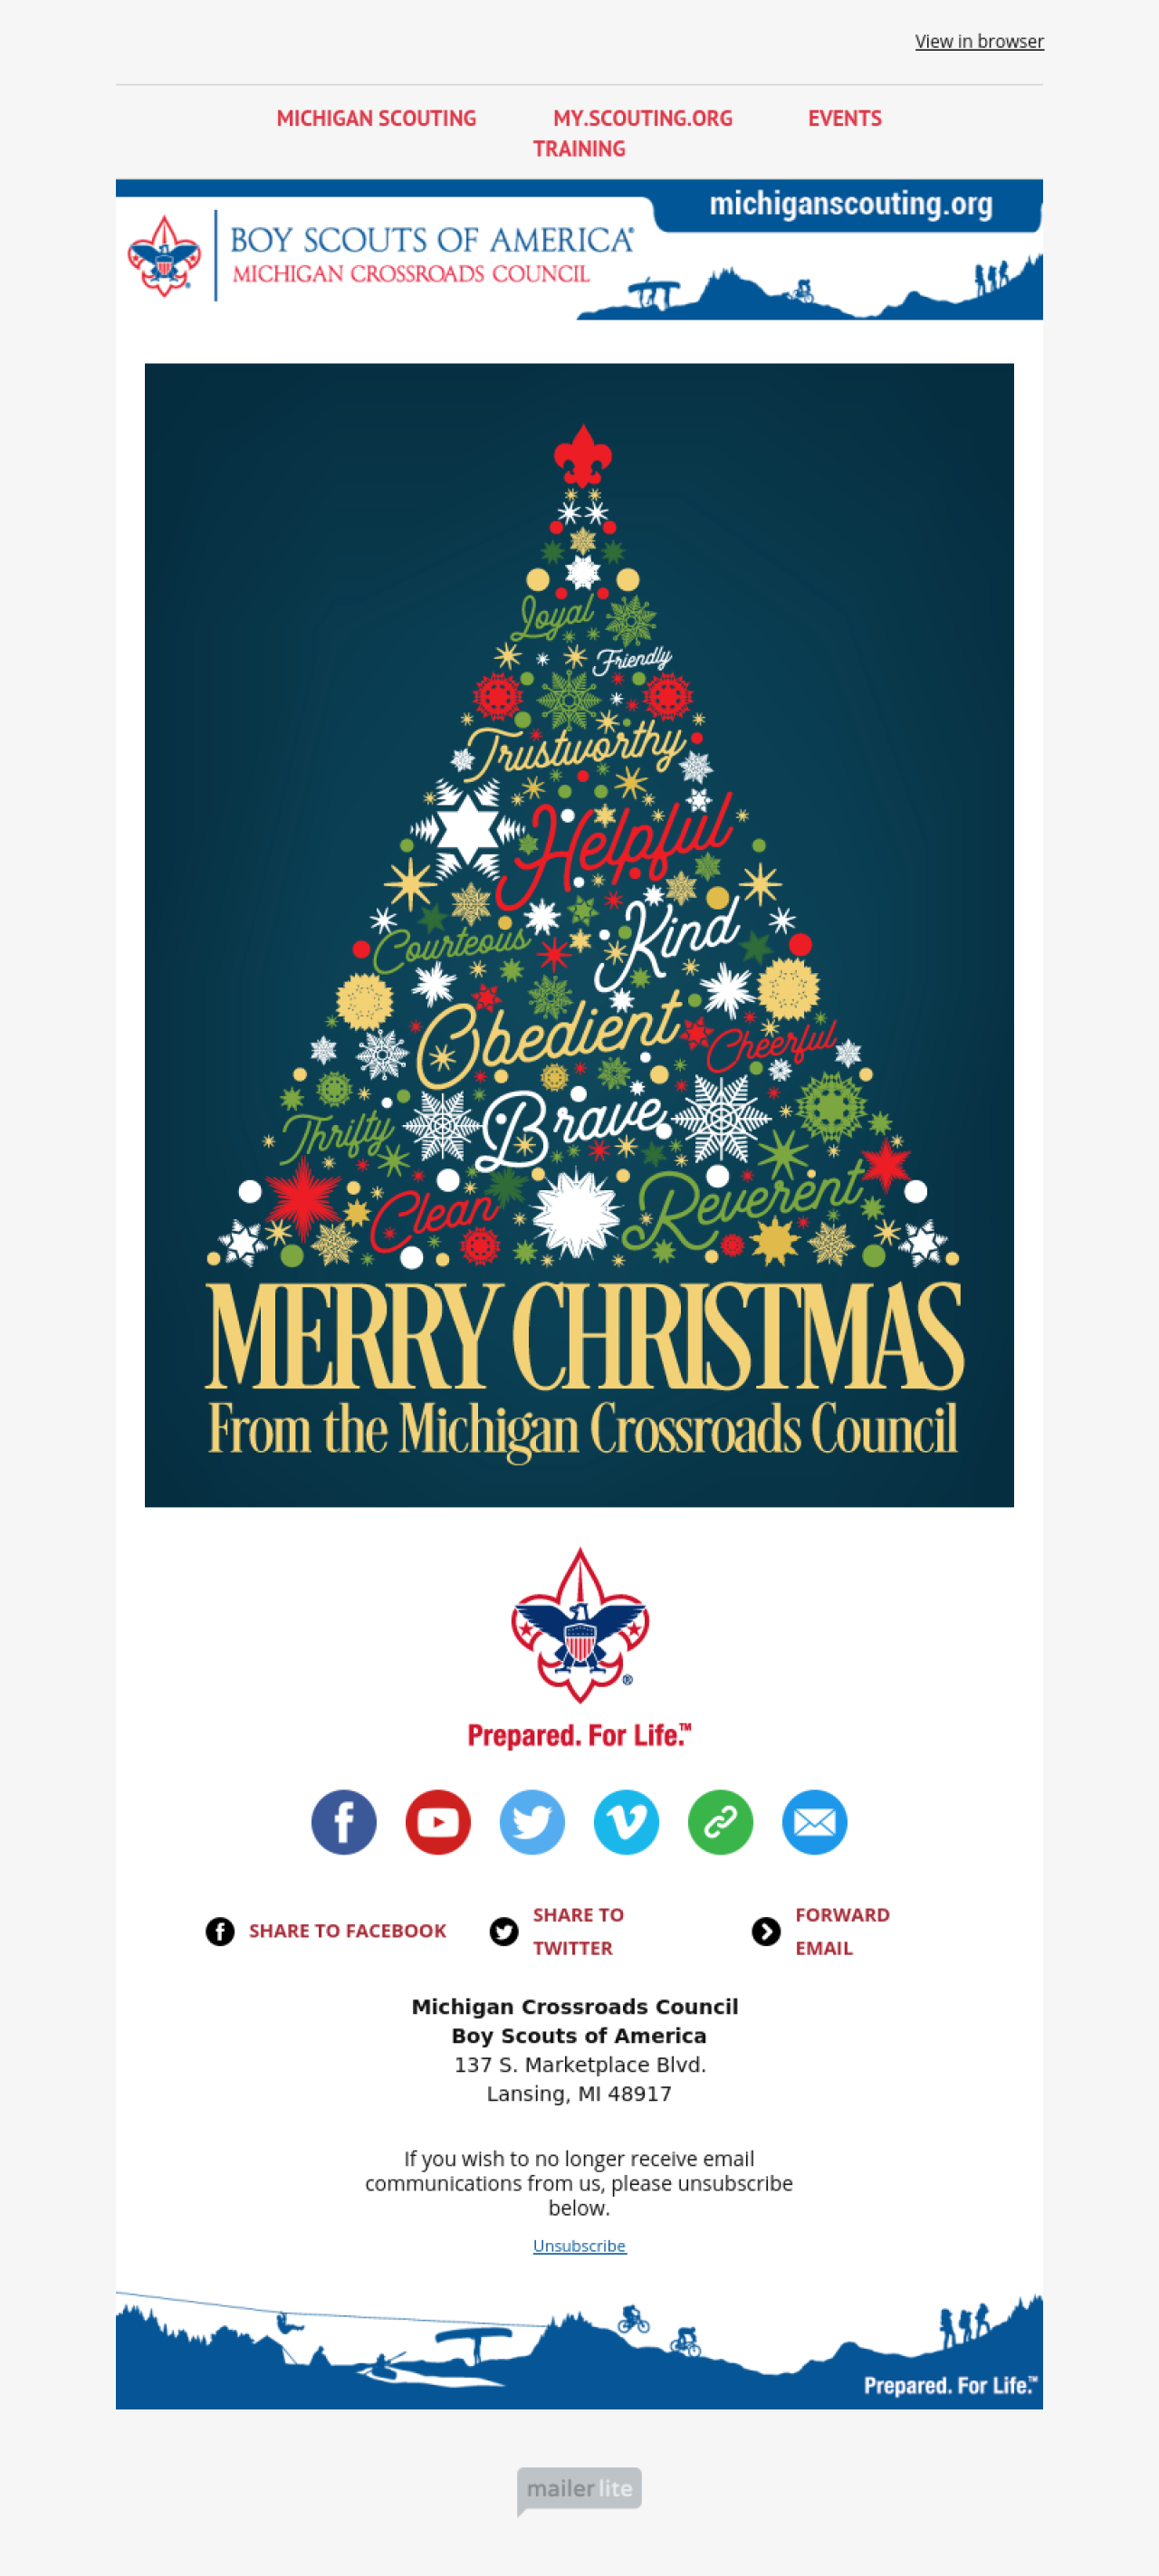 Michigan Crossroads Council BSA - Christmas example - Made with MailerLite